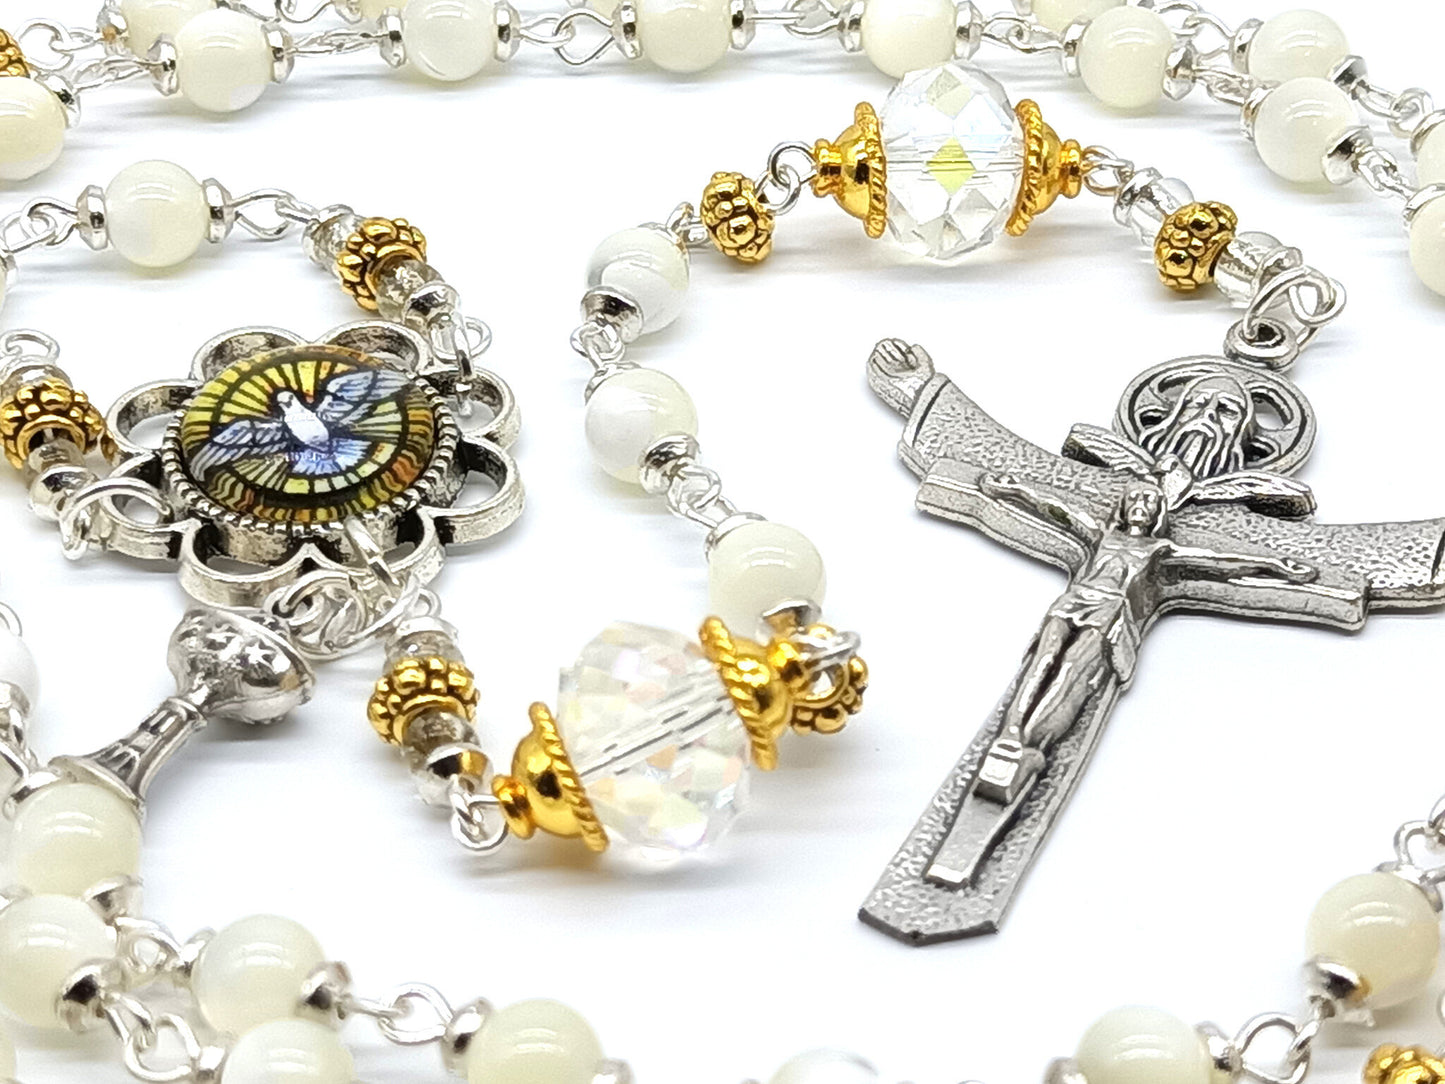 Genuine mother of pearl unique rosary beads with silver crucifix, Holy Spirit  picture centre medal, cut glass pater beads and gold bead caps.